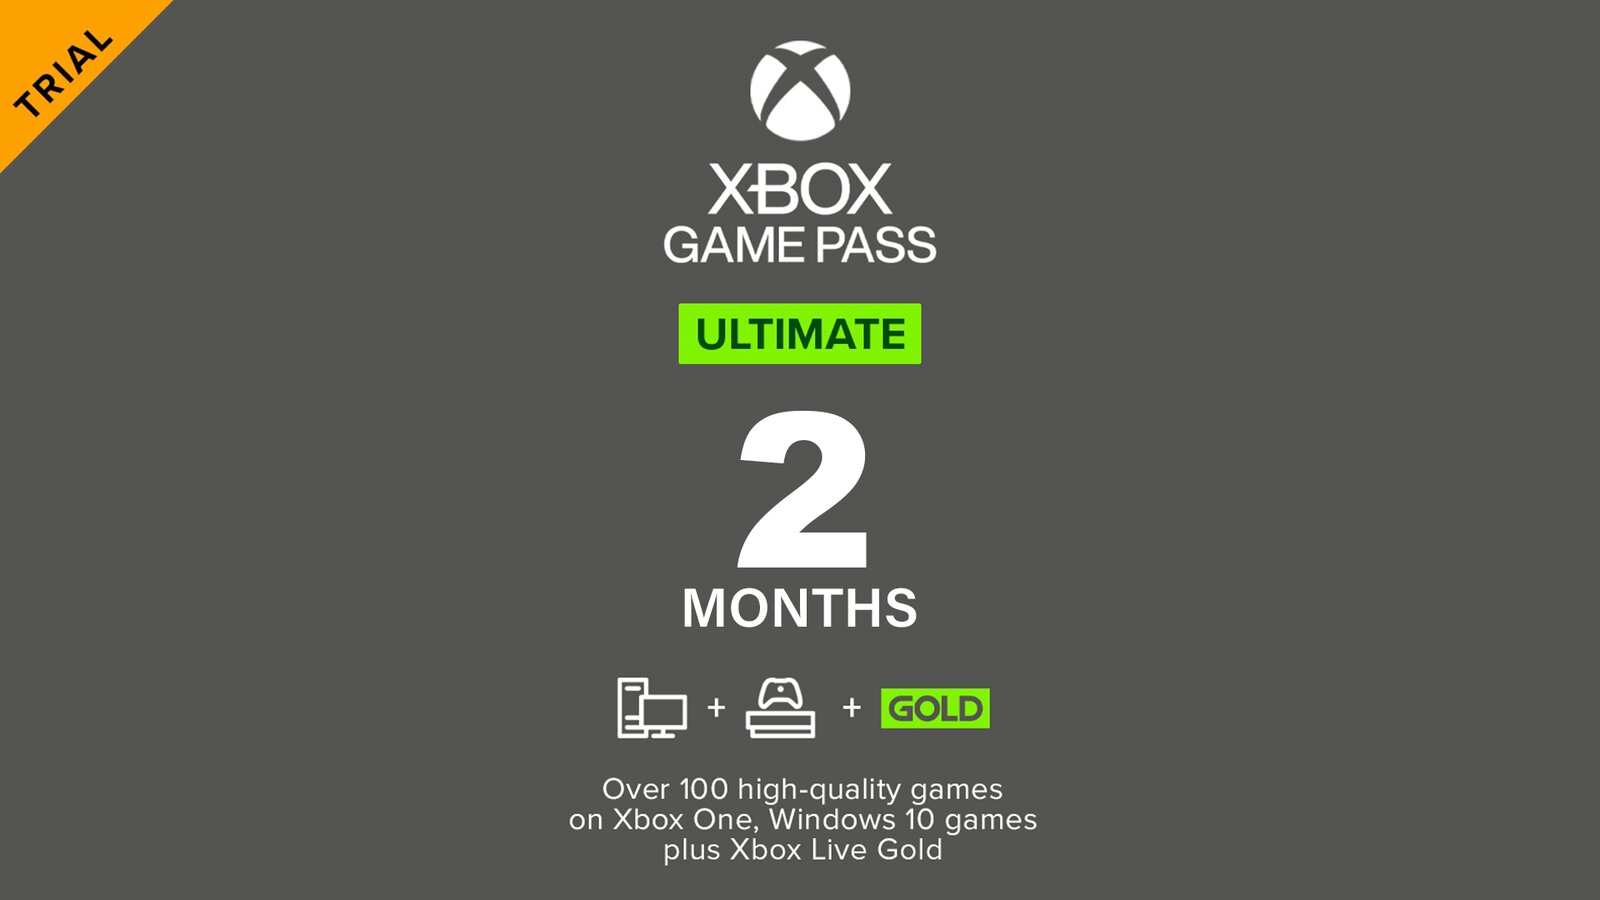 Xbox Game Pass Ultimate на 2 месяца (Trial)